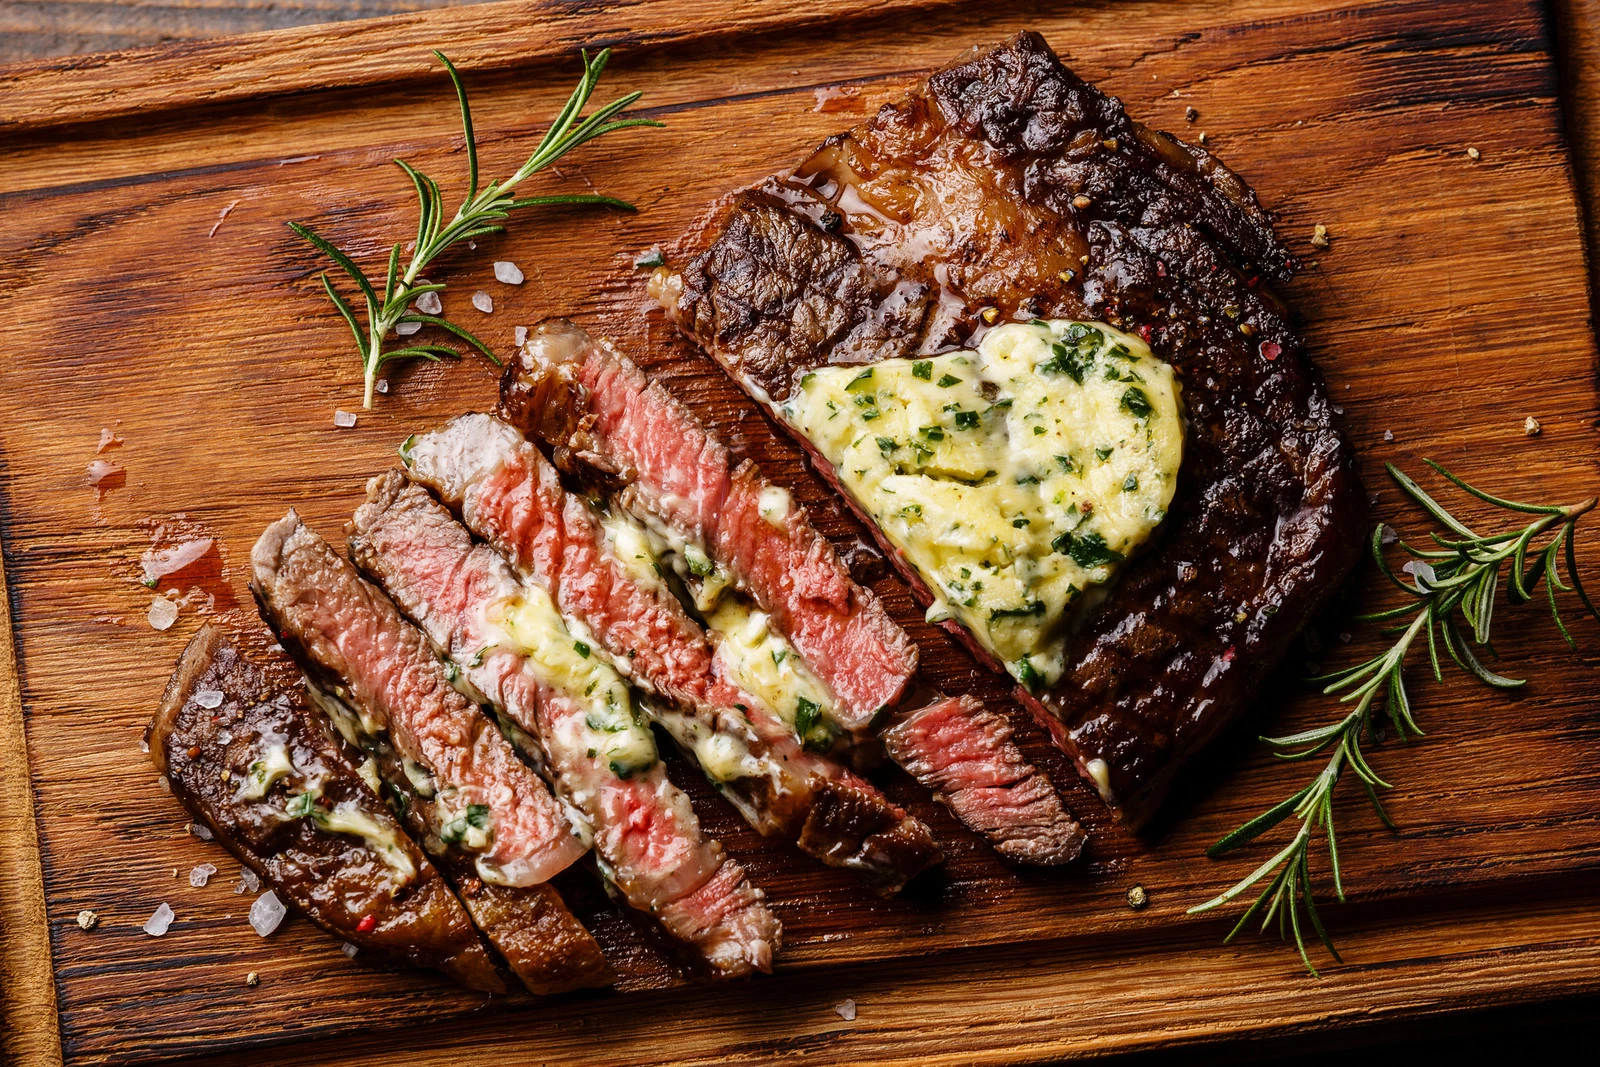 Treat dad to a great steak at LongHorn Steakhouse this Father's Day